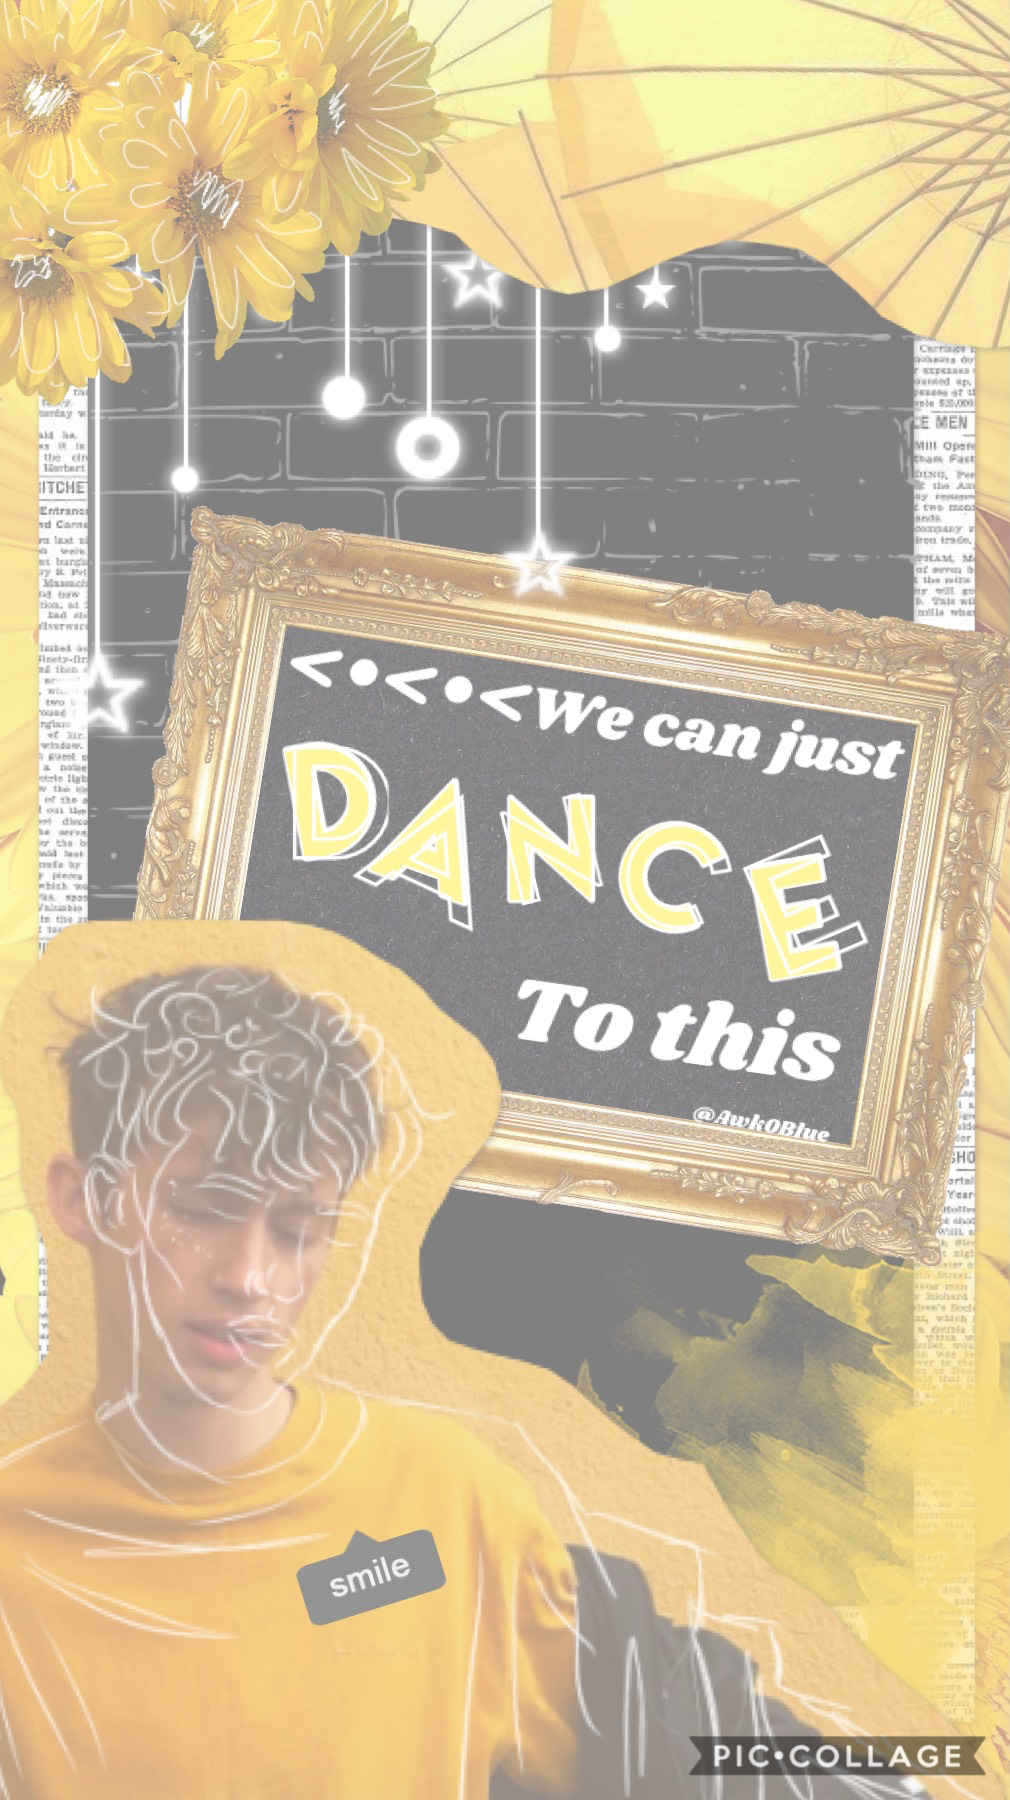 🐥 t a p p y 🐥

Ehhh idk about this one but imma post it anyways. Dance to this by Troye Sivan ft. Ariana Grande is a 🅱️ussy 🅱️op 

Rate ?/10 

QOTD: Favourite tv show?

AOTD: Sherlock!🕵️‍♂️